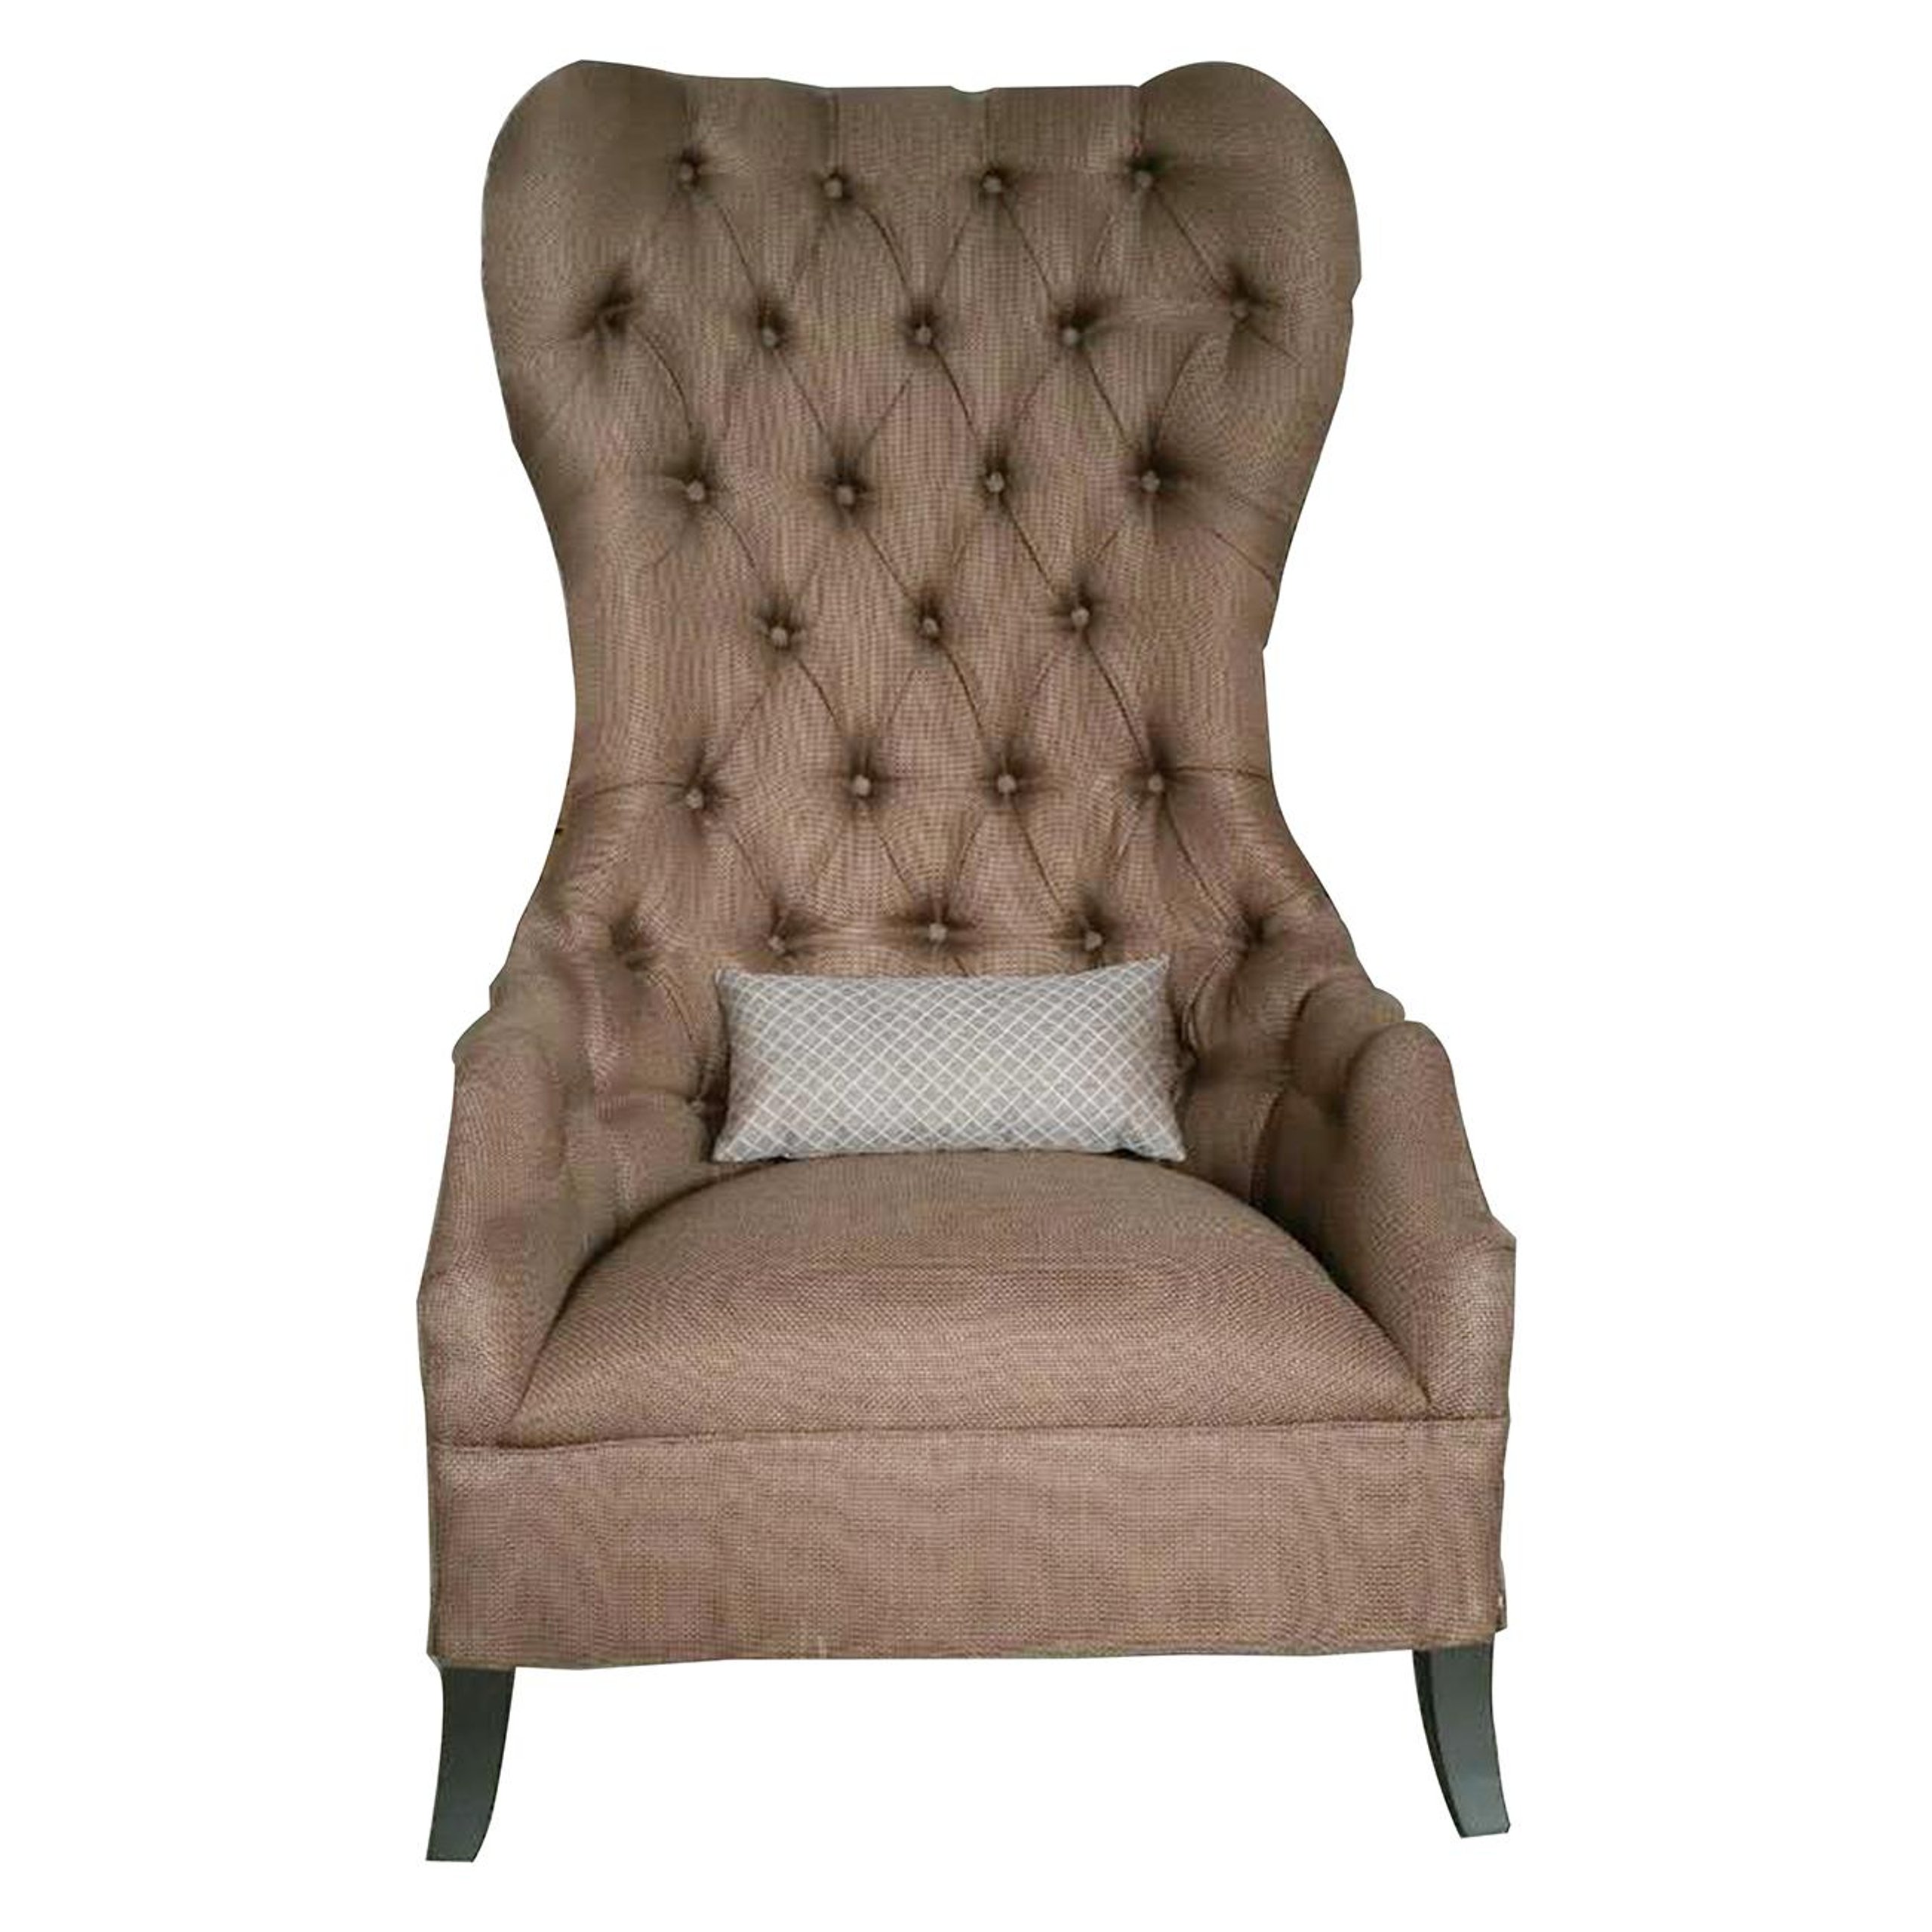 Best deal for A&B Home 40958 Arm Chairs in Cappuccino, Polyester $1,099.95